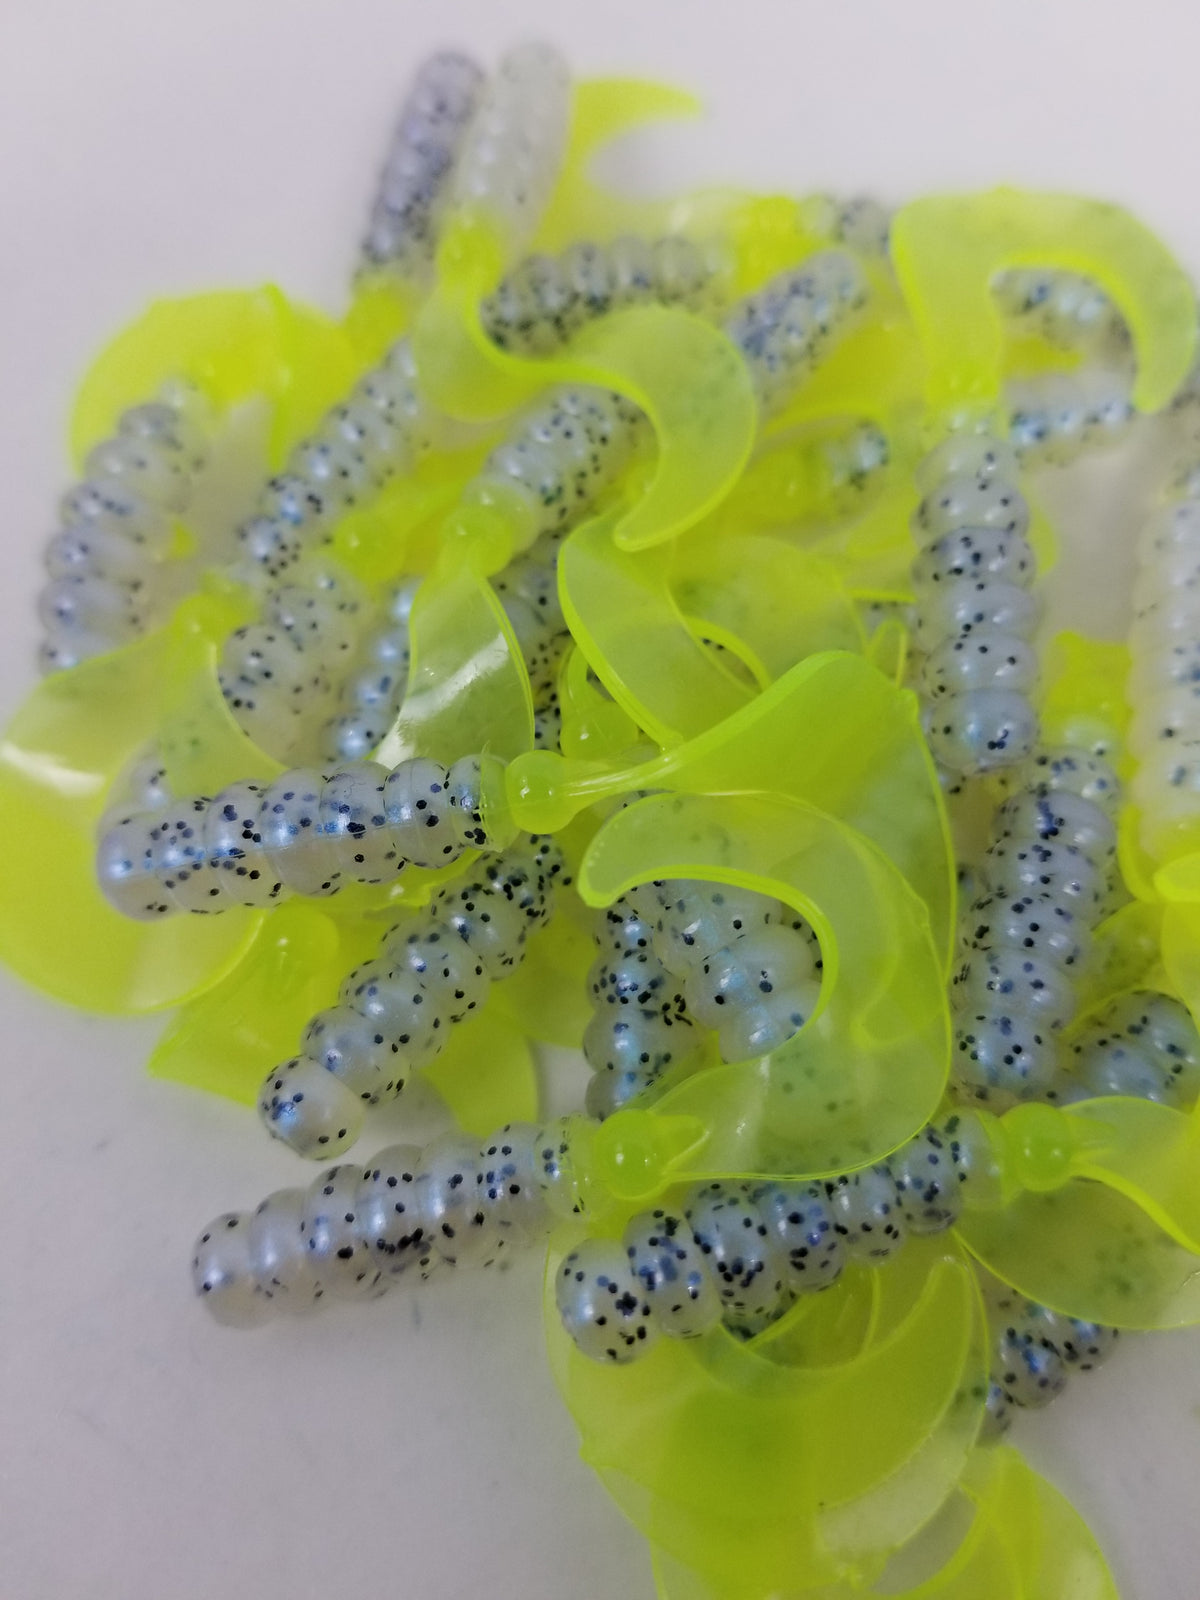 2023 Cam's 2(HOLOGRAM FLAKE) Curly Tail Grub 40pc Monkey Milk & Chartreuse  Curly Tail Crappie Soft Jigs [A Cam's Exclusive]